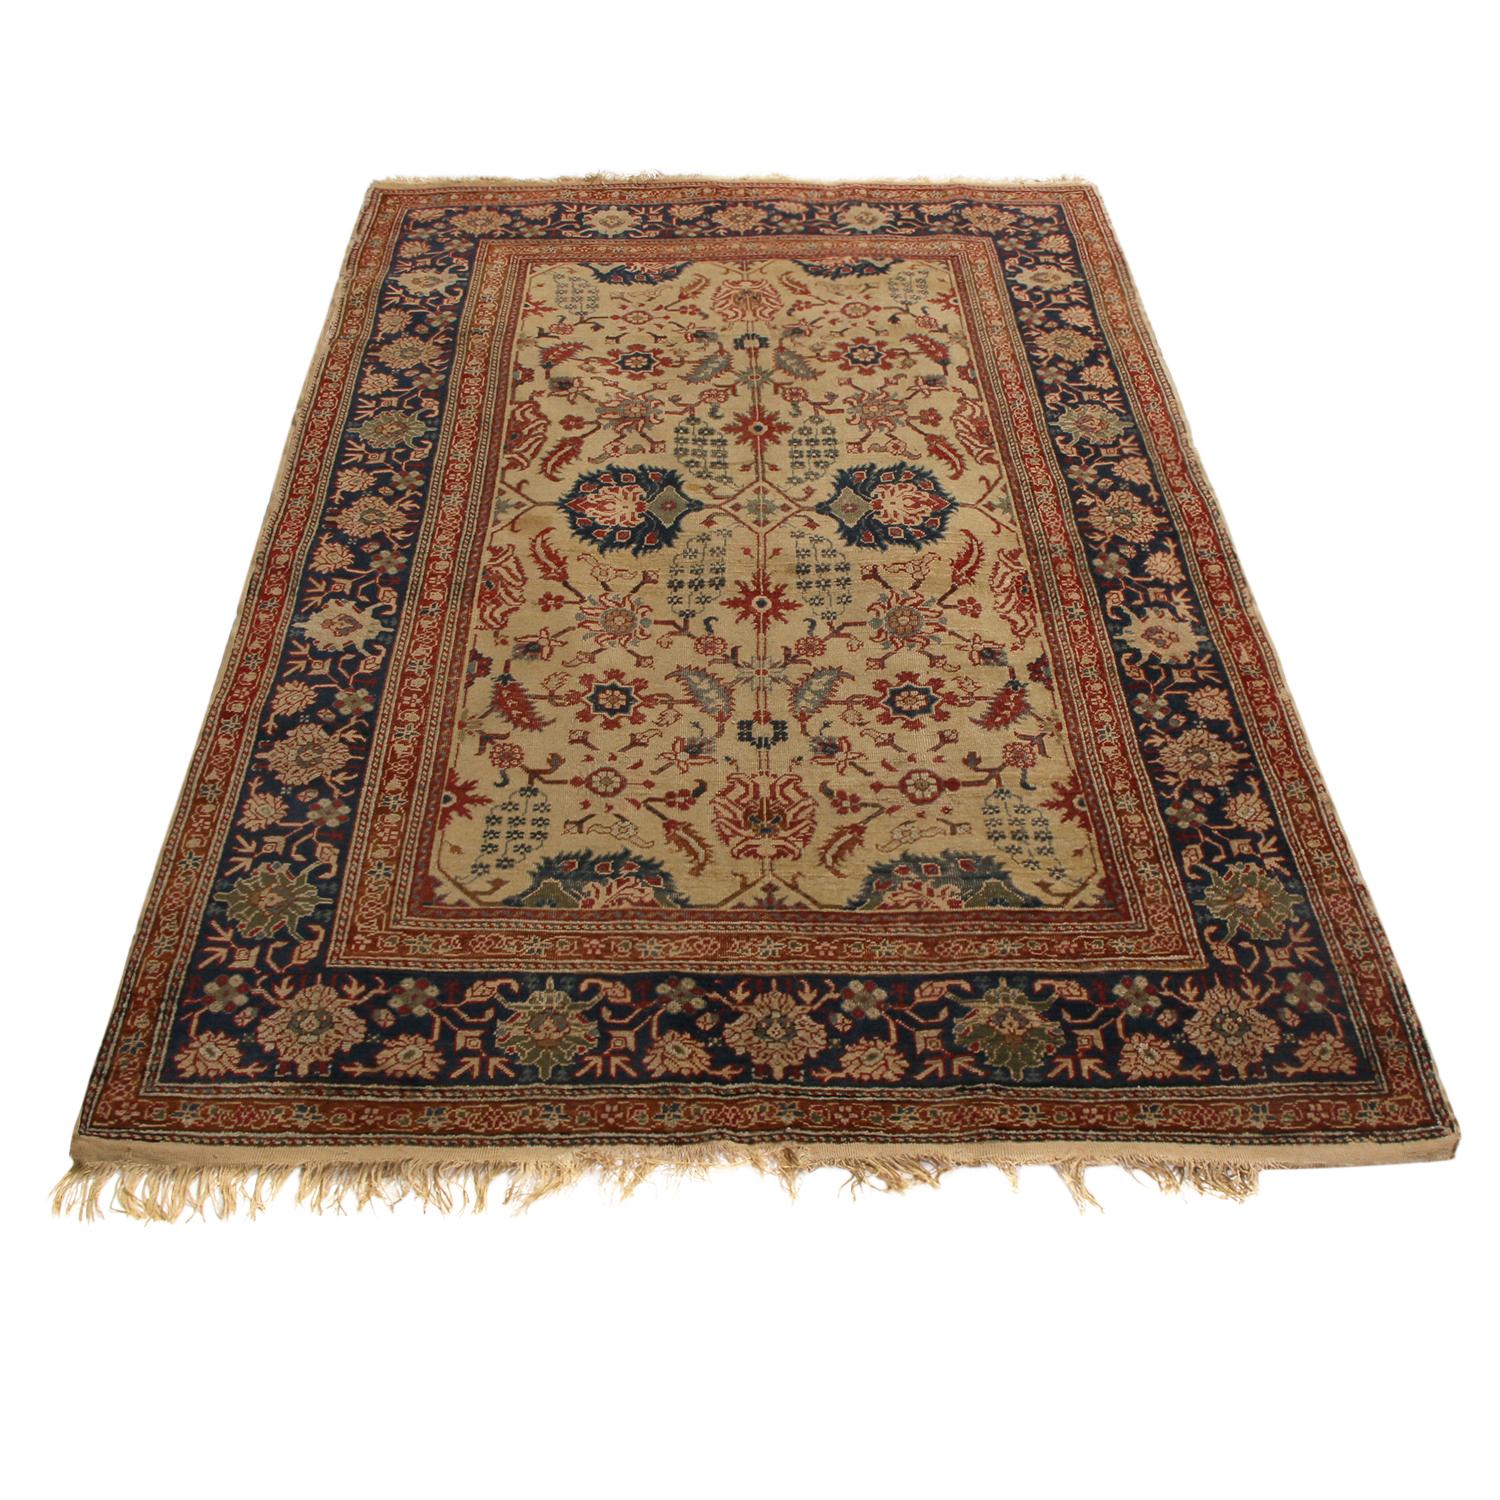 Hand knotted in high-quality wool originating from Turkey between 1890-1900, this antique Kayseri wool rug hosts a classic pairing of russet and navy blue color ways complemented by a beige field background. Enjoying pristine condition and